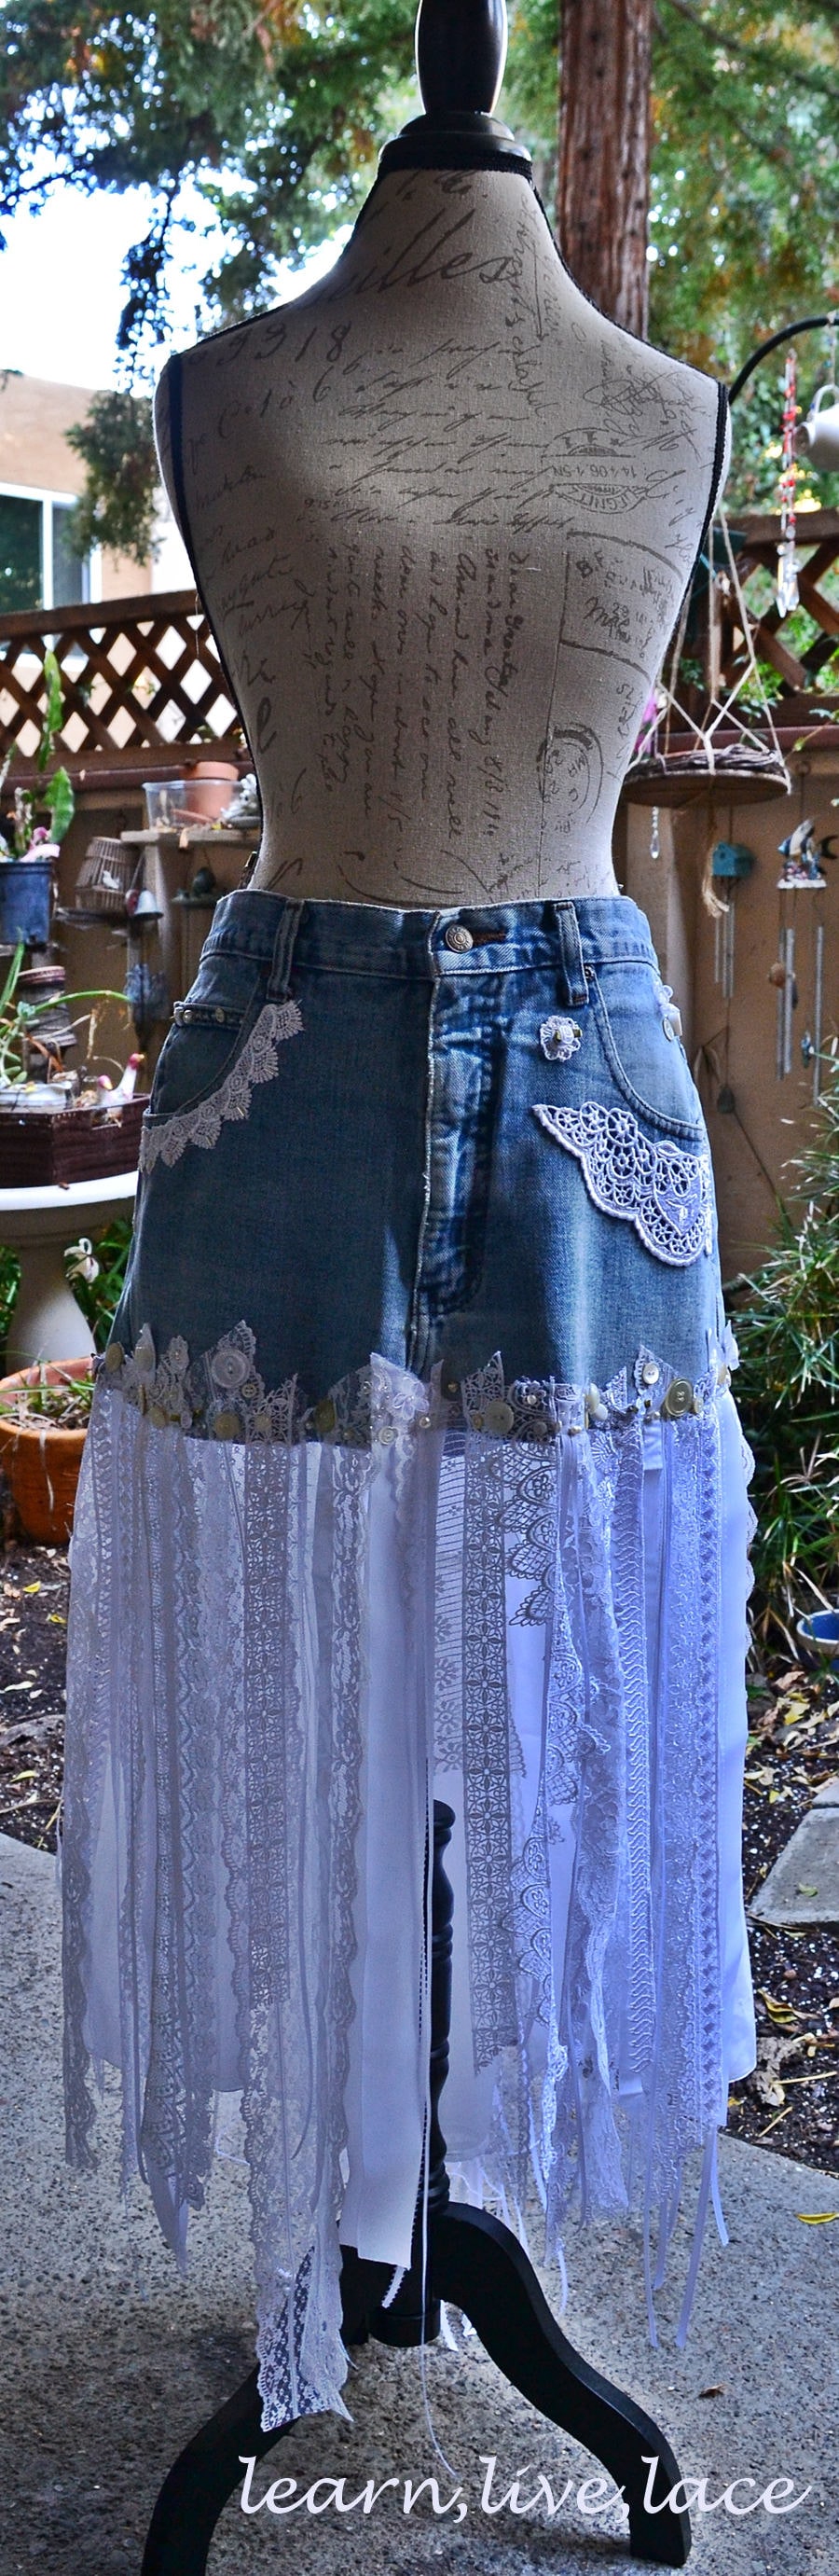 Cherokee and Lace Denim Jeans White Wedding Lace Skirt | Etsy